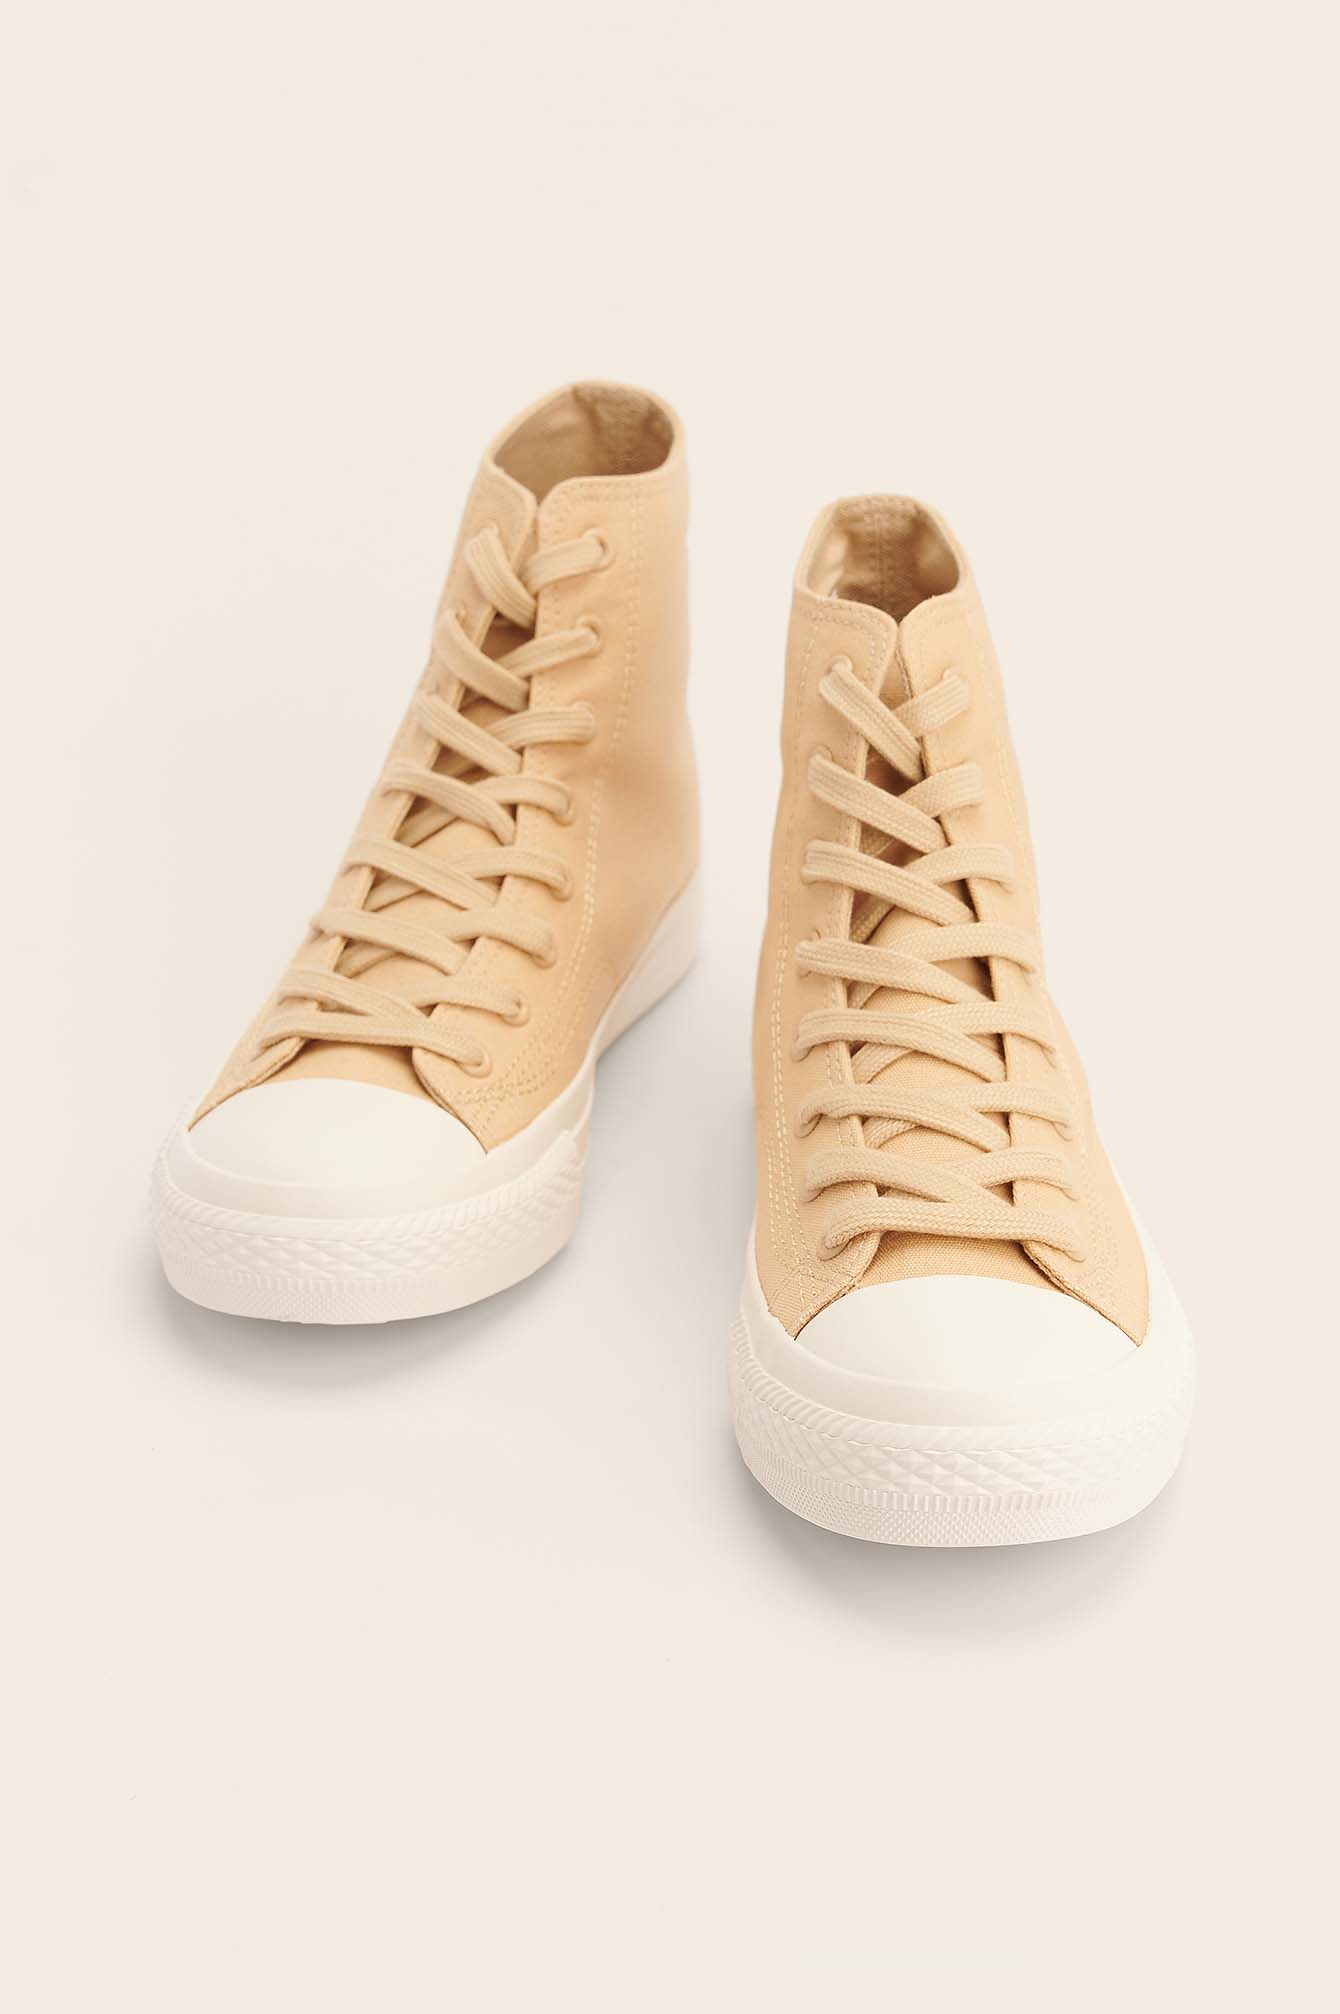 Beige High Lace Up Trainers